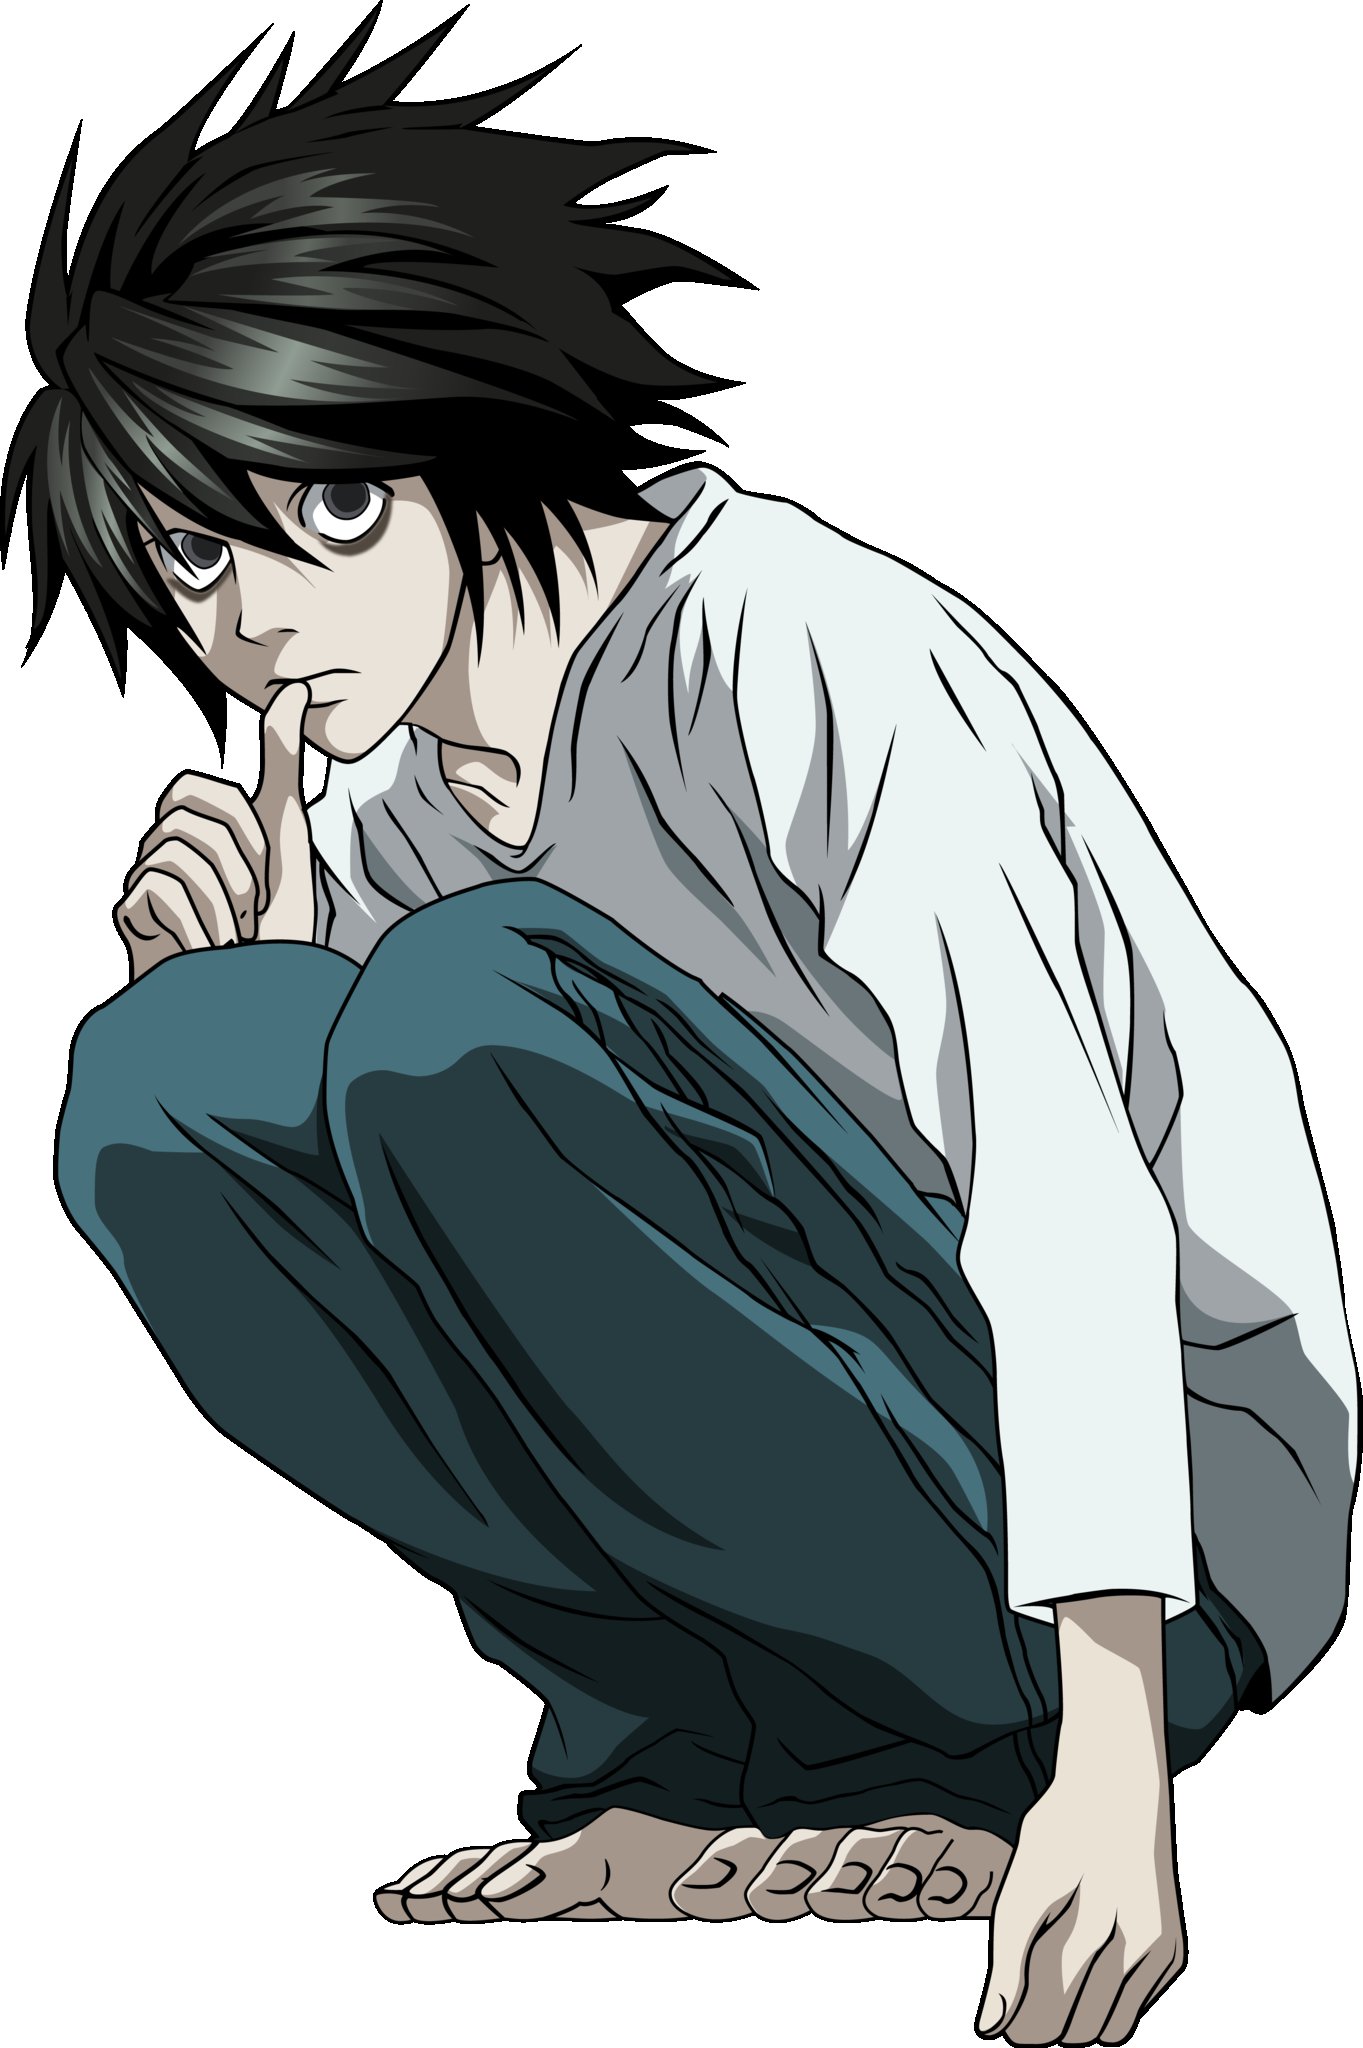 Image - L-character.jpg | Death Note Wiki | FANDOM powered by Wikia